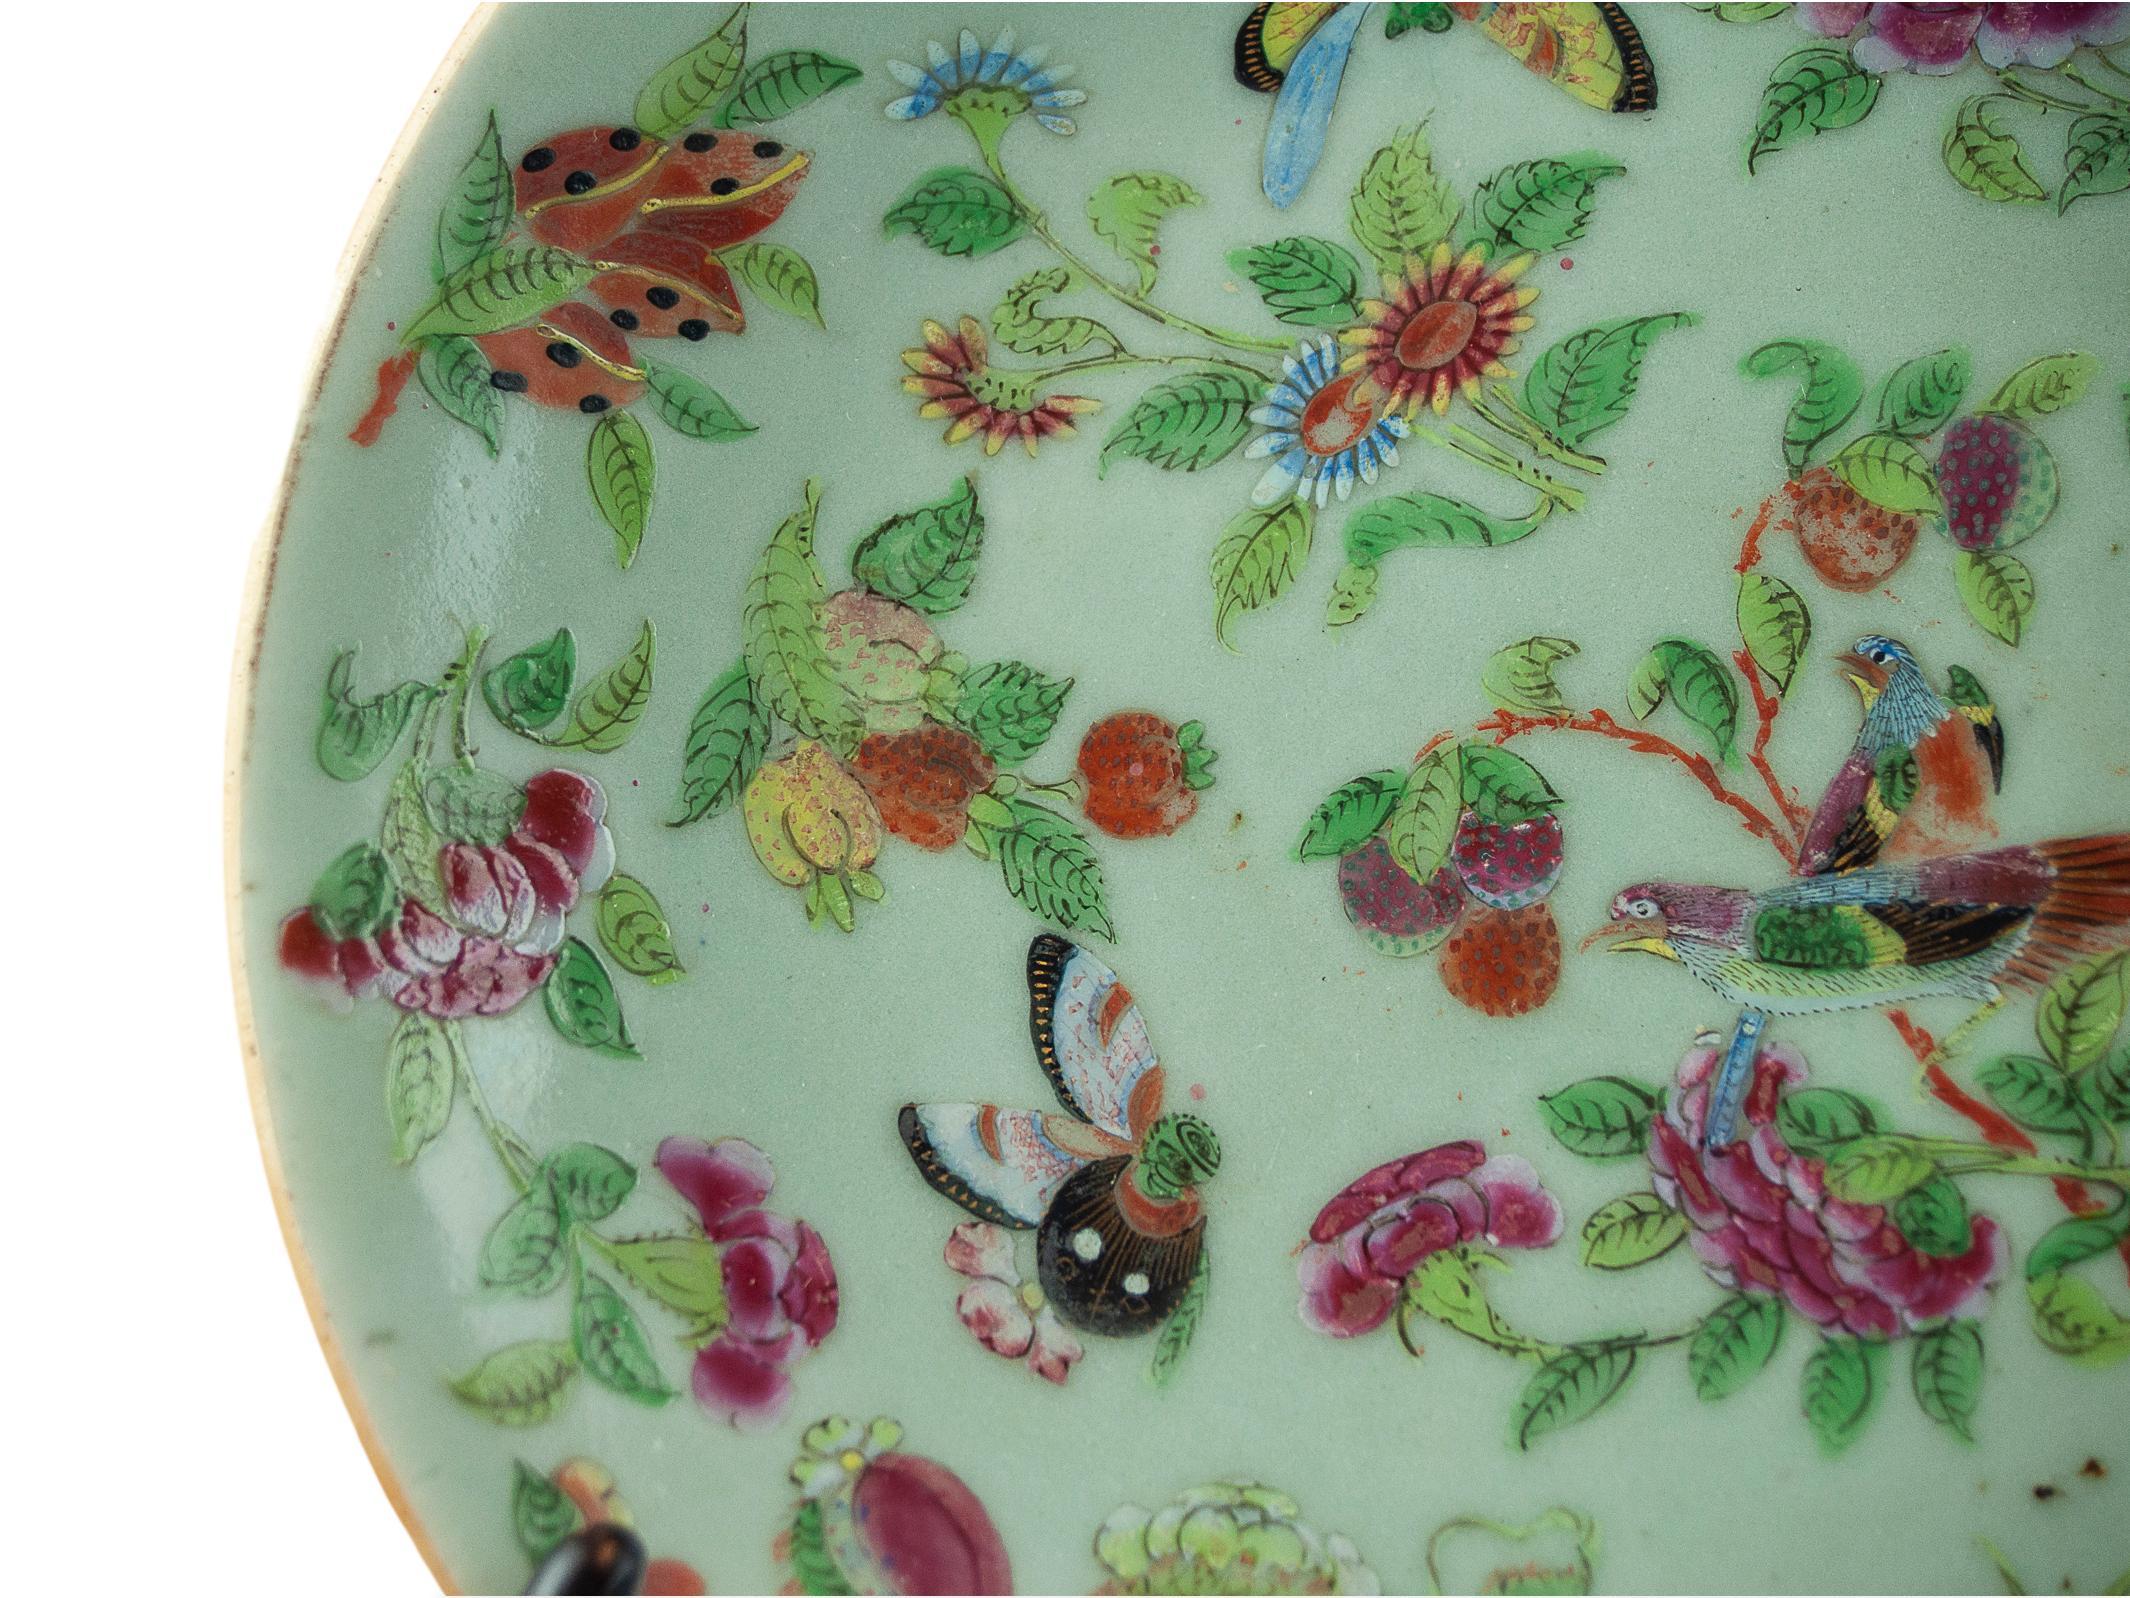 Early 19th Century Chinese Celadon Famille Rose 10-inch Plate, Canton, Qing Dynasty, ca. 1850